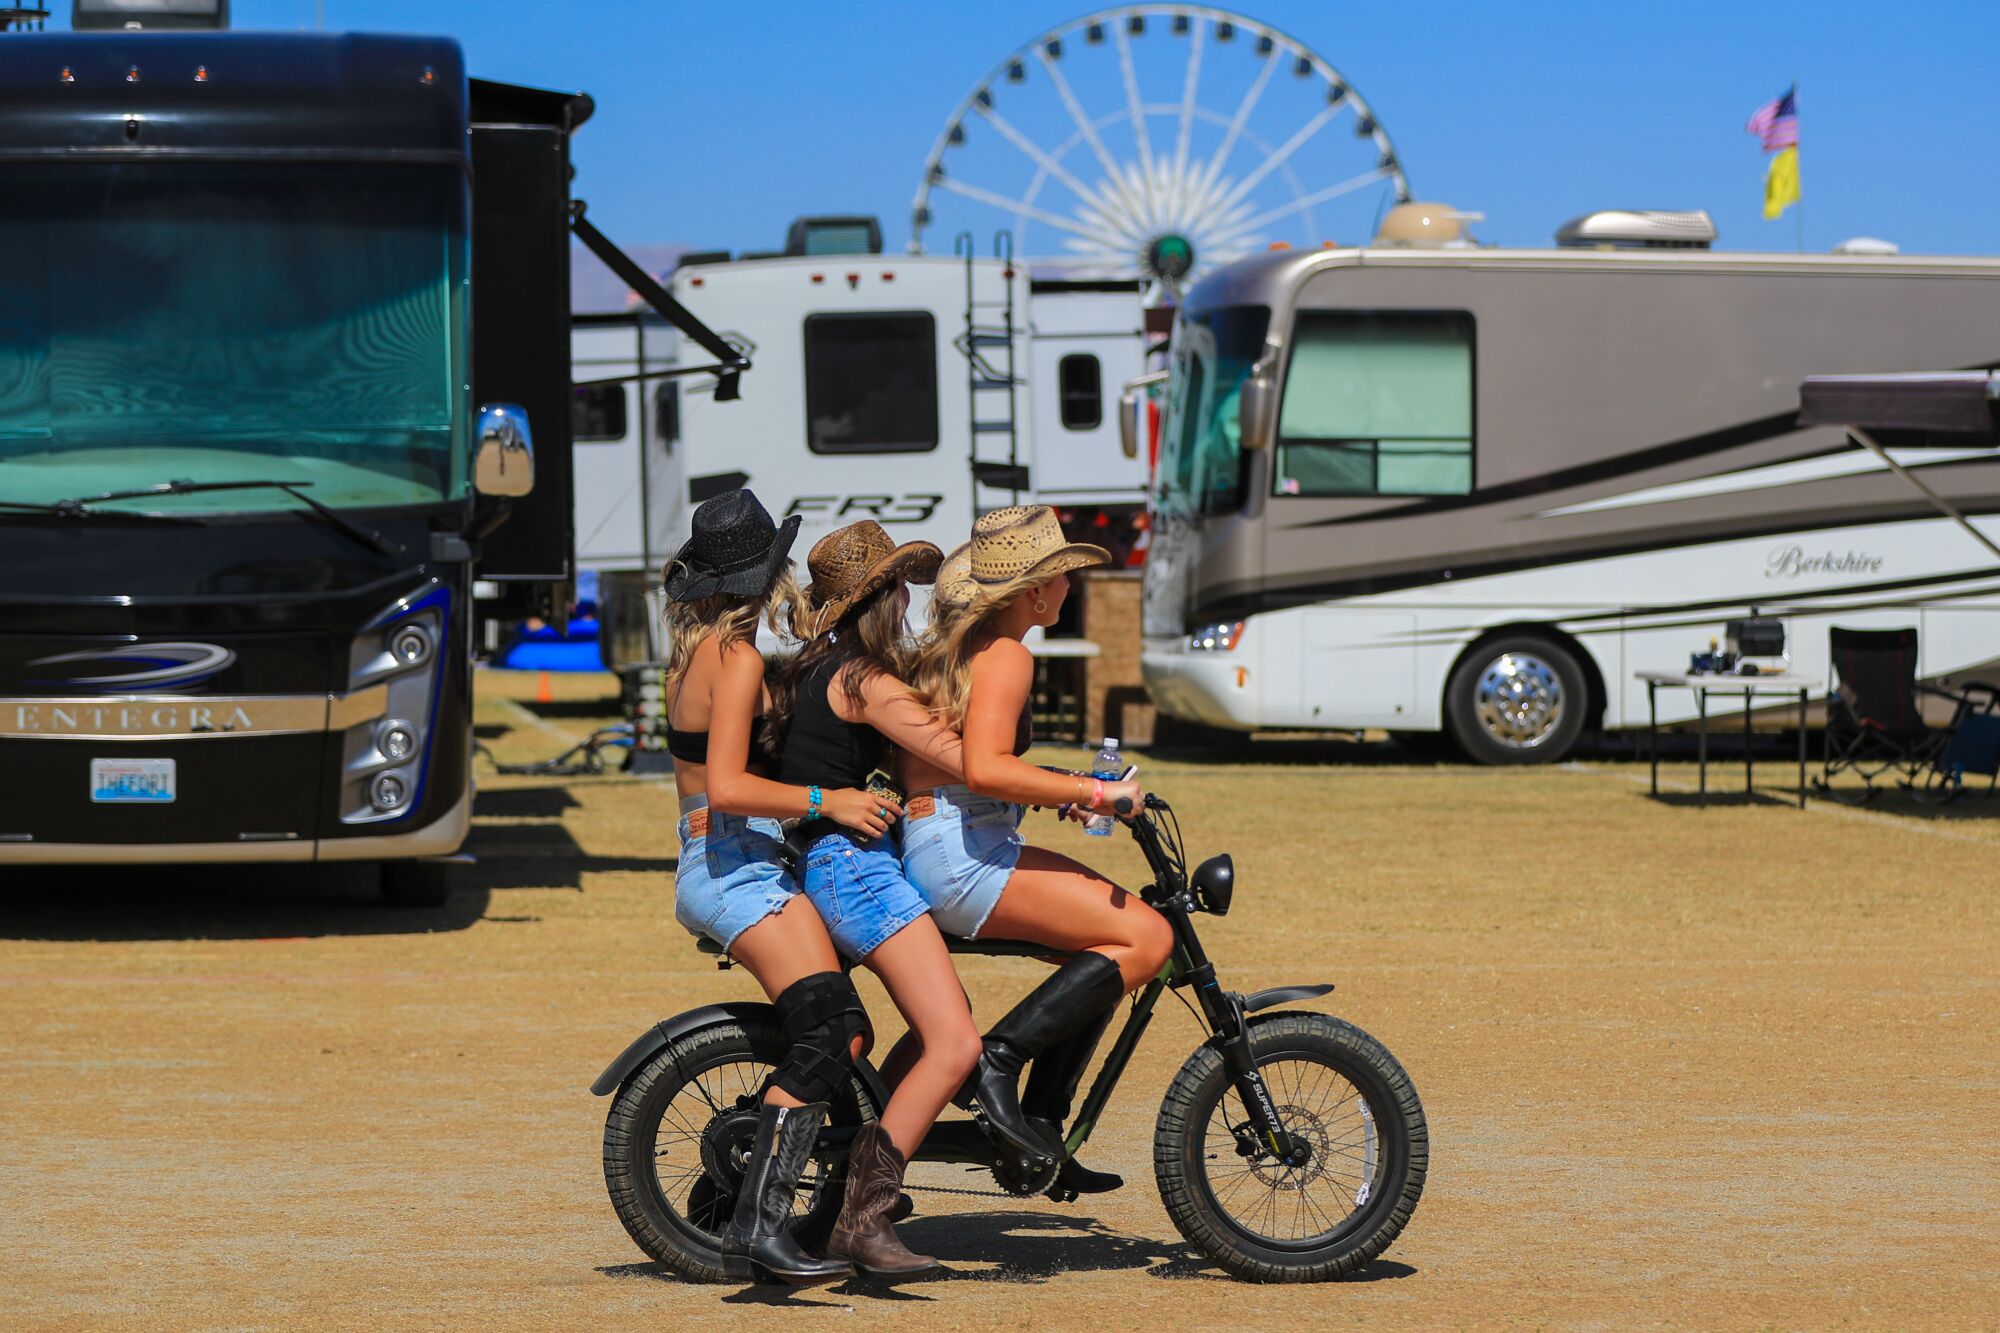 Three women in cowboy boots and hats and shorts ride an electric bike together on the Stagecoach campground.